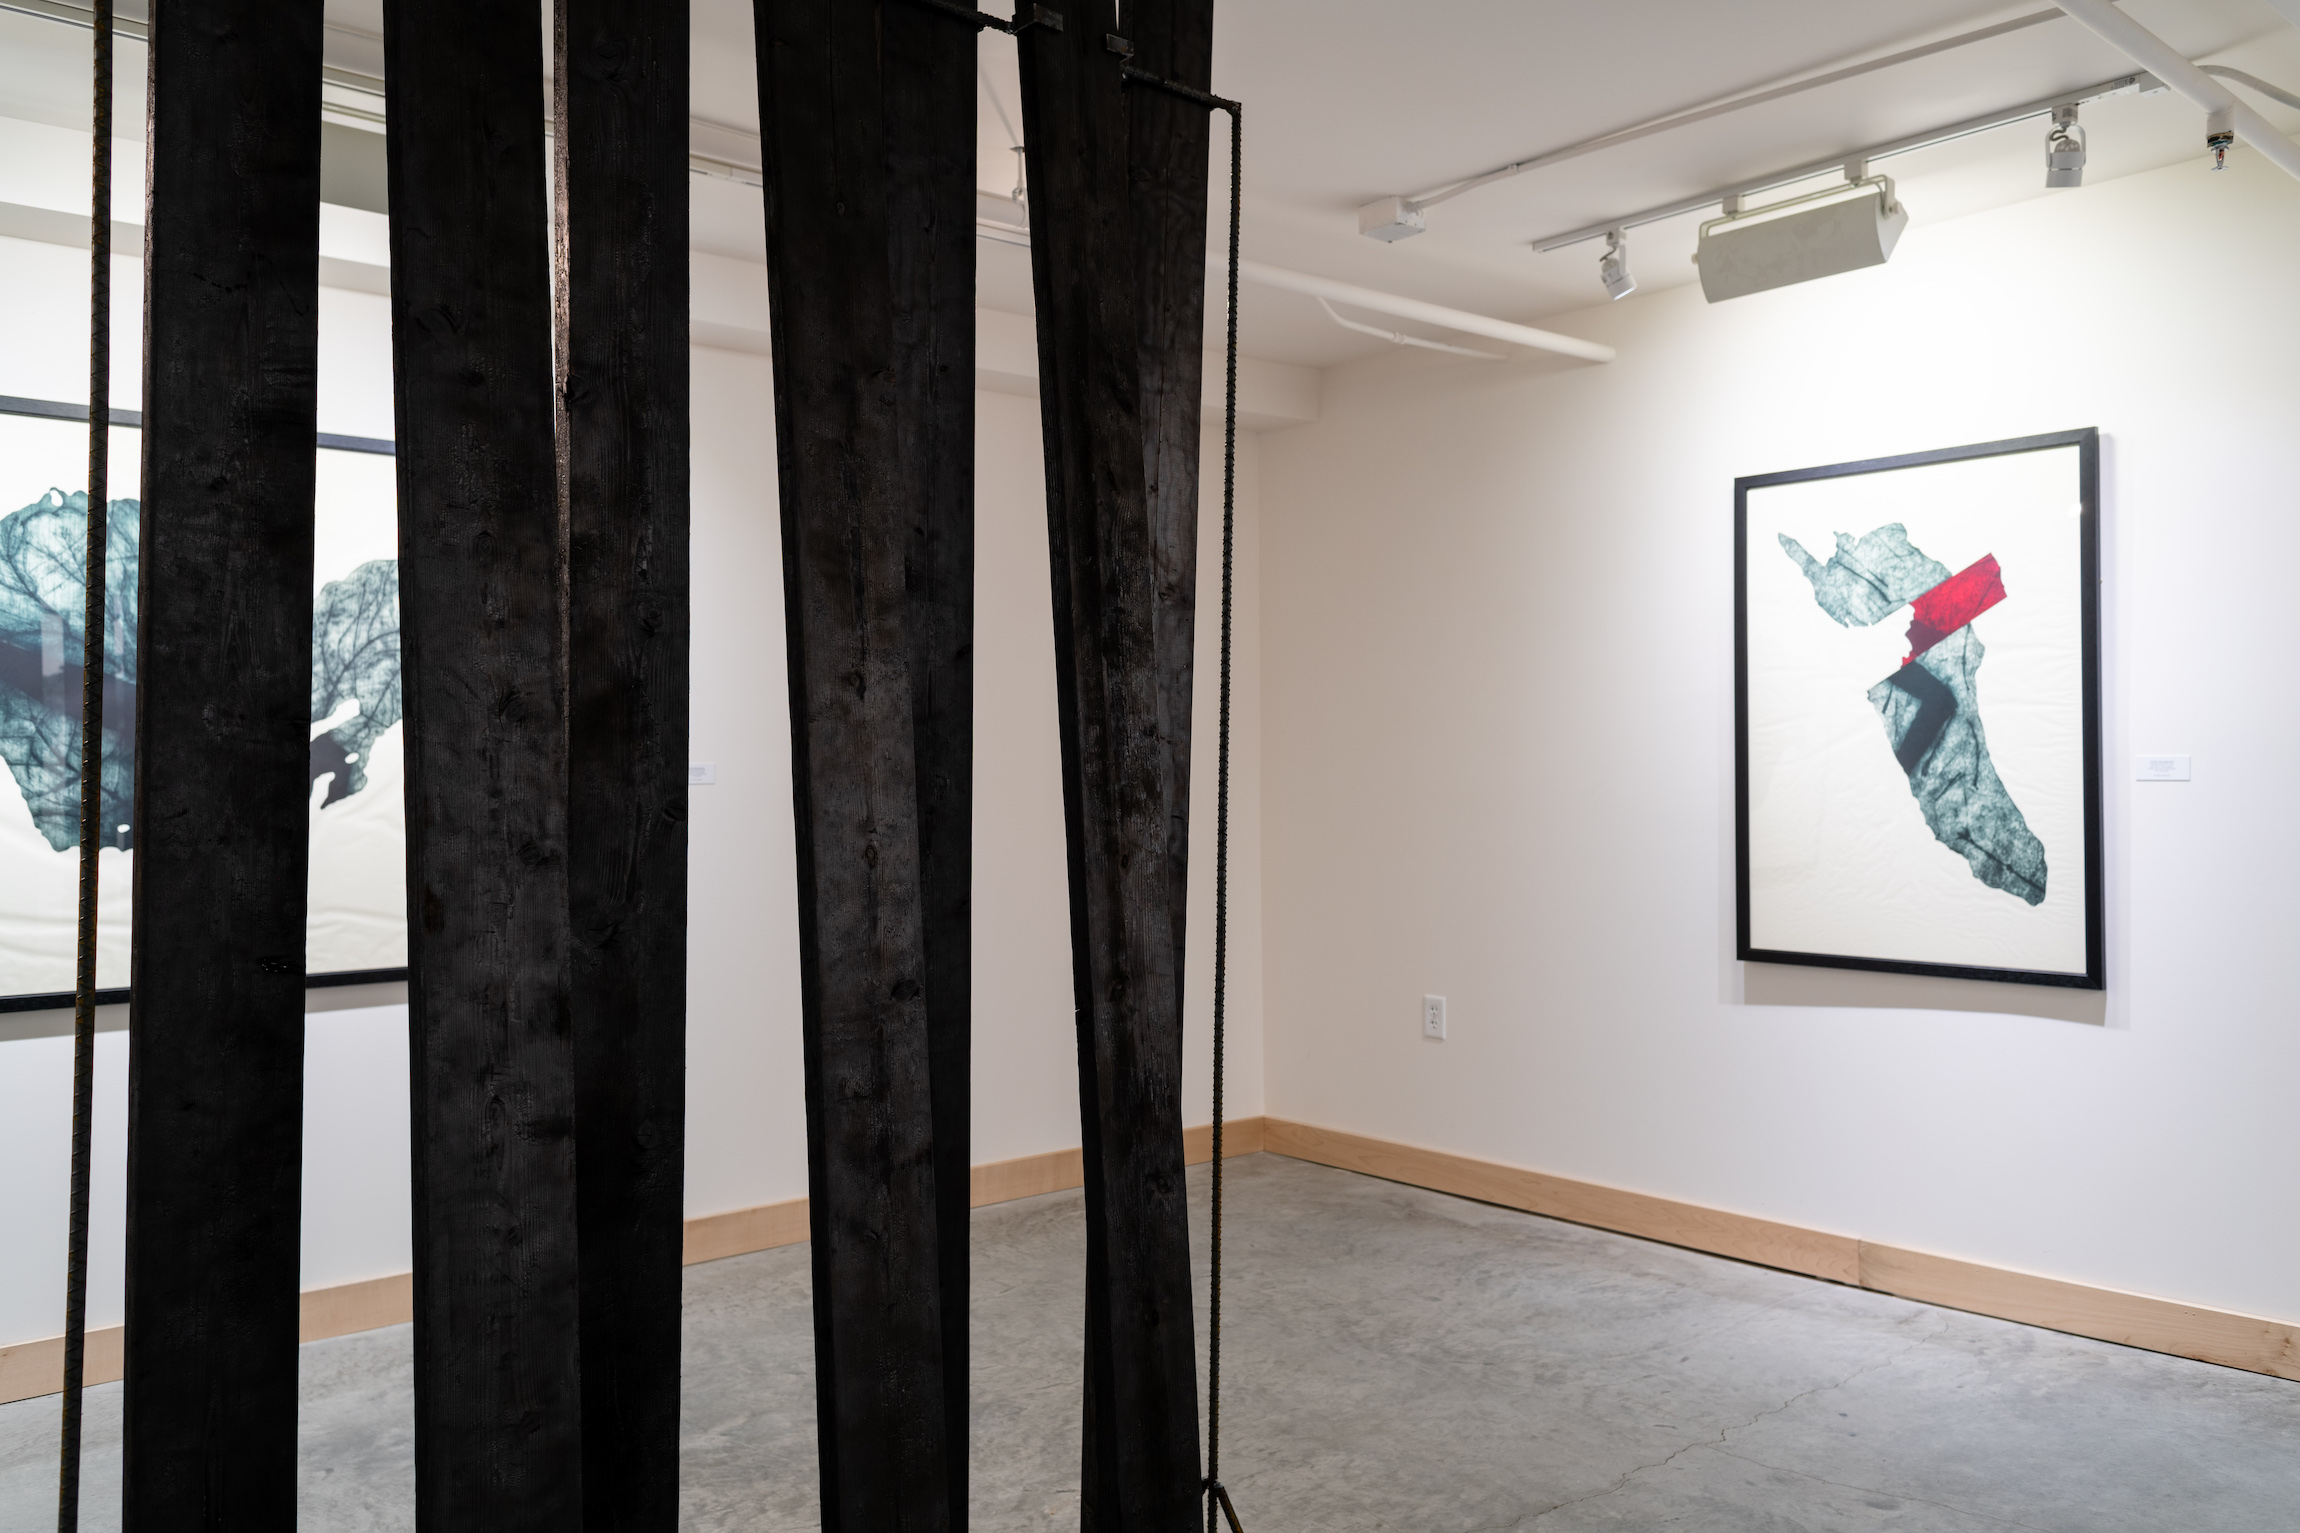 Installation view of Carissa Kalia Heinrichs' Master of Fine Arts exhibition As the Crow Flies at the Apex Gallery of Tandem Press, University of Wisconsin-Madison. Photography by Kyle Herrera.